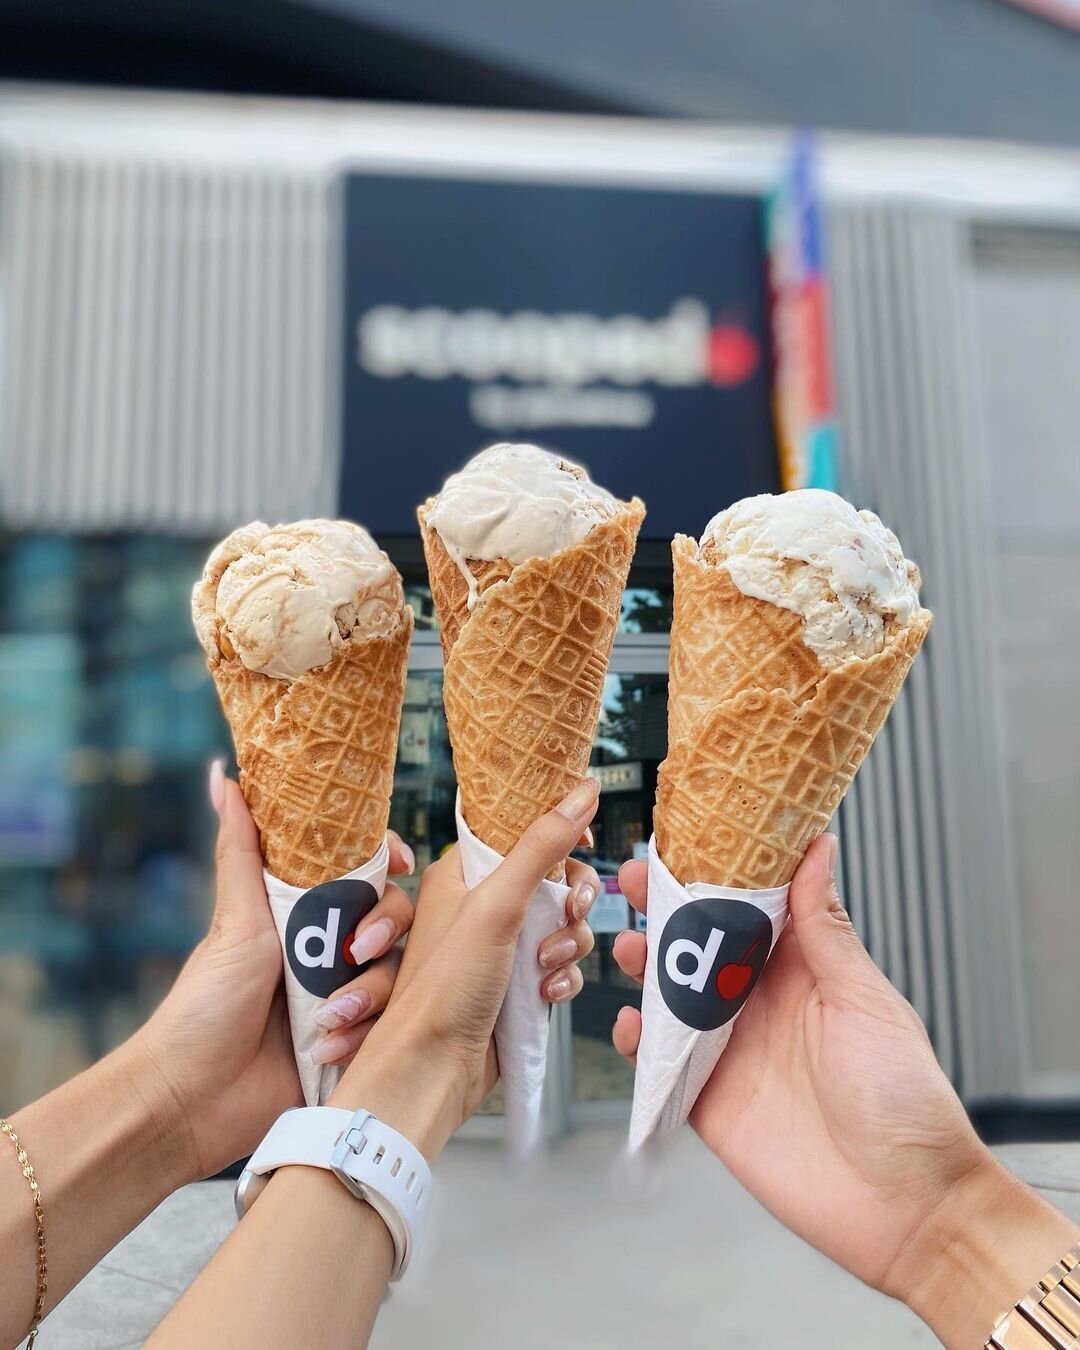 Cold, creamy, and oh so dreamy 🍦💭

📍CityPlace: 113 Fort York Boulevard
📍Distillery District: 46 Gristmill Lane
📸 @ma.eatse